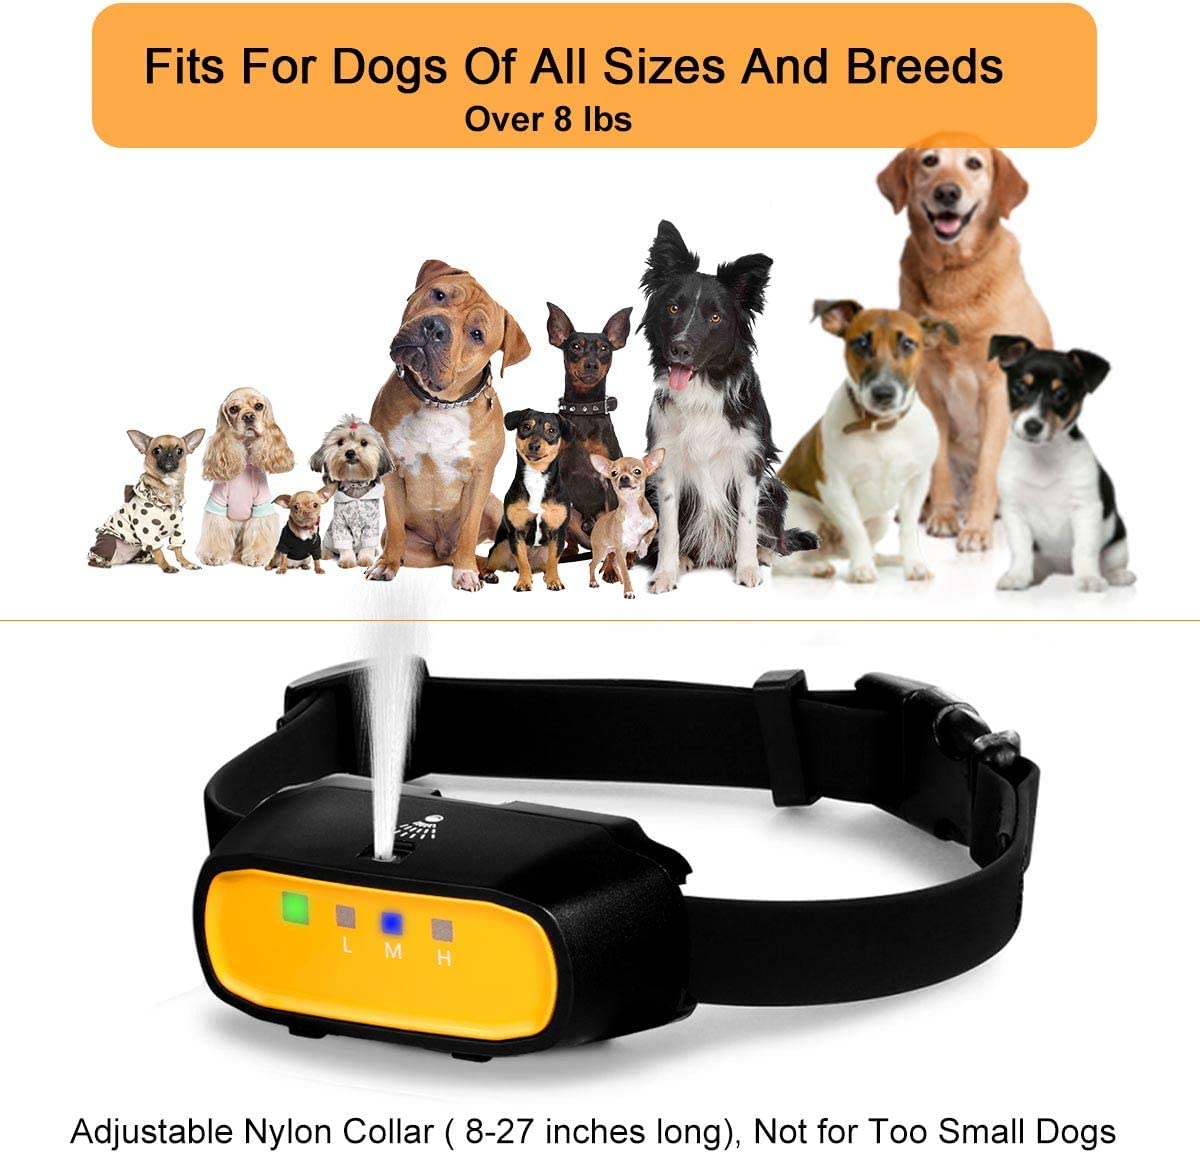 Spray Dog Training Collar with Remote Control,2 Modes Spray Dog Bark Collar (Not Included Citronella Spray),500 ft Range No Electric Shock Harmless,Rechargeable Waterproof (with Remote Control)